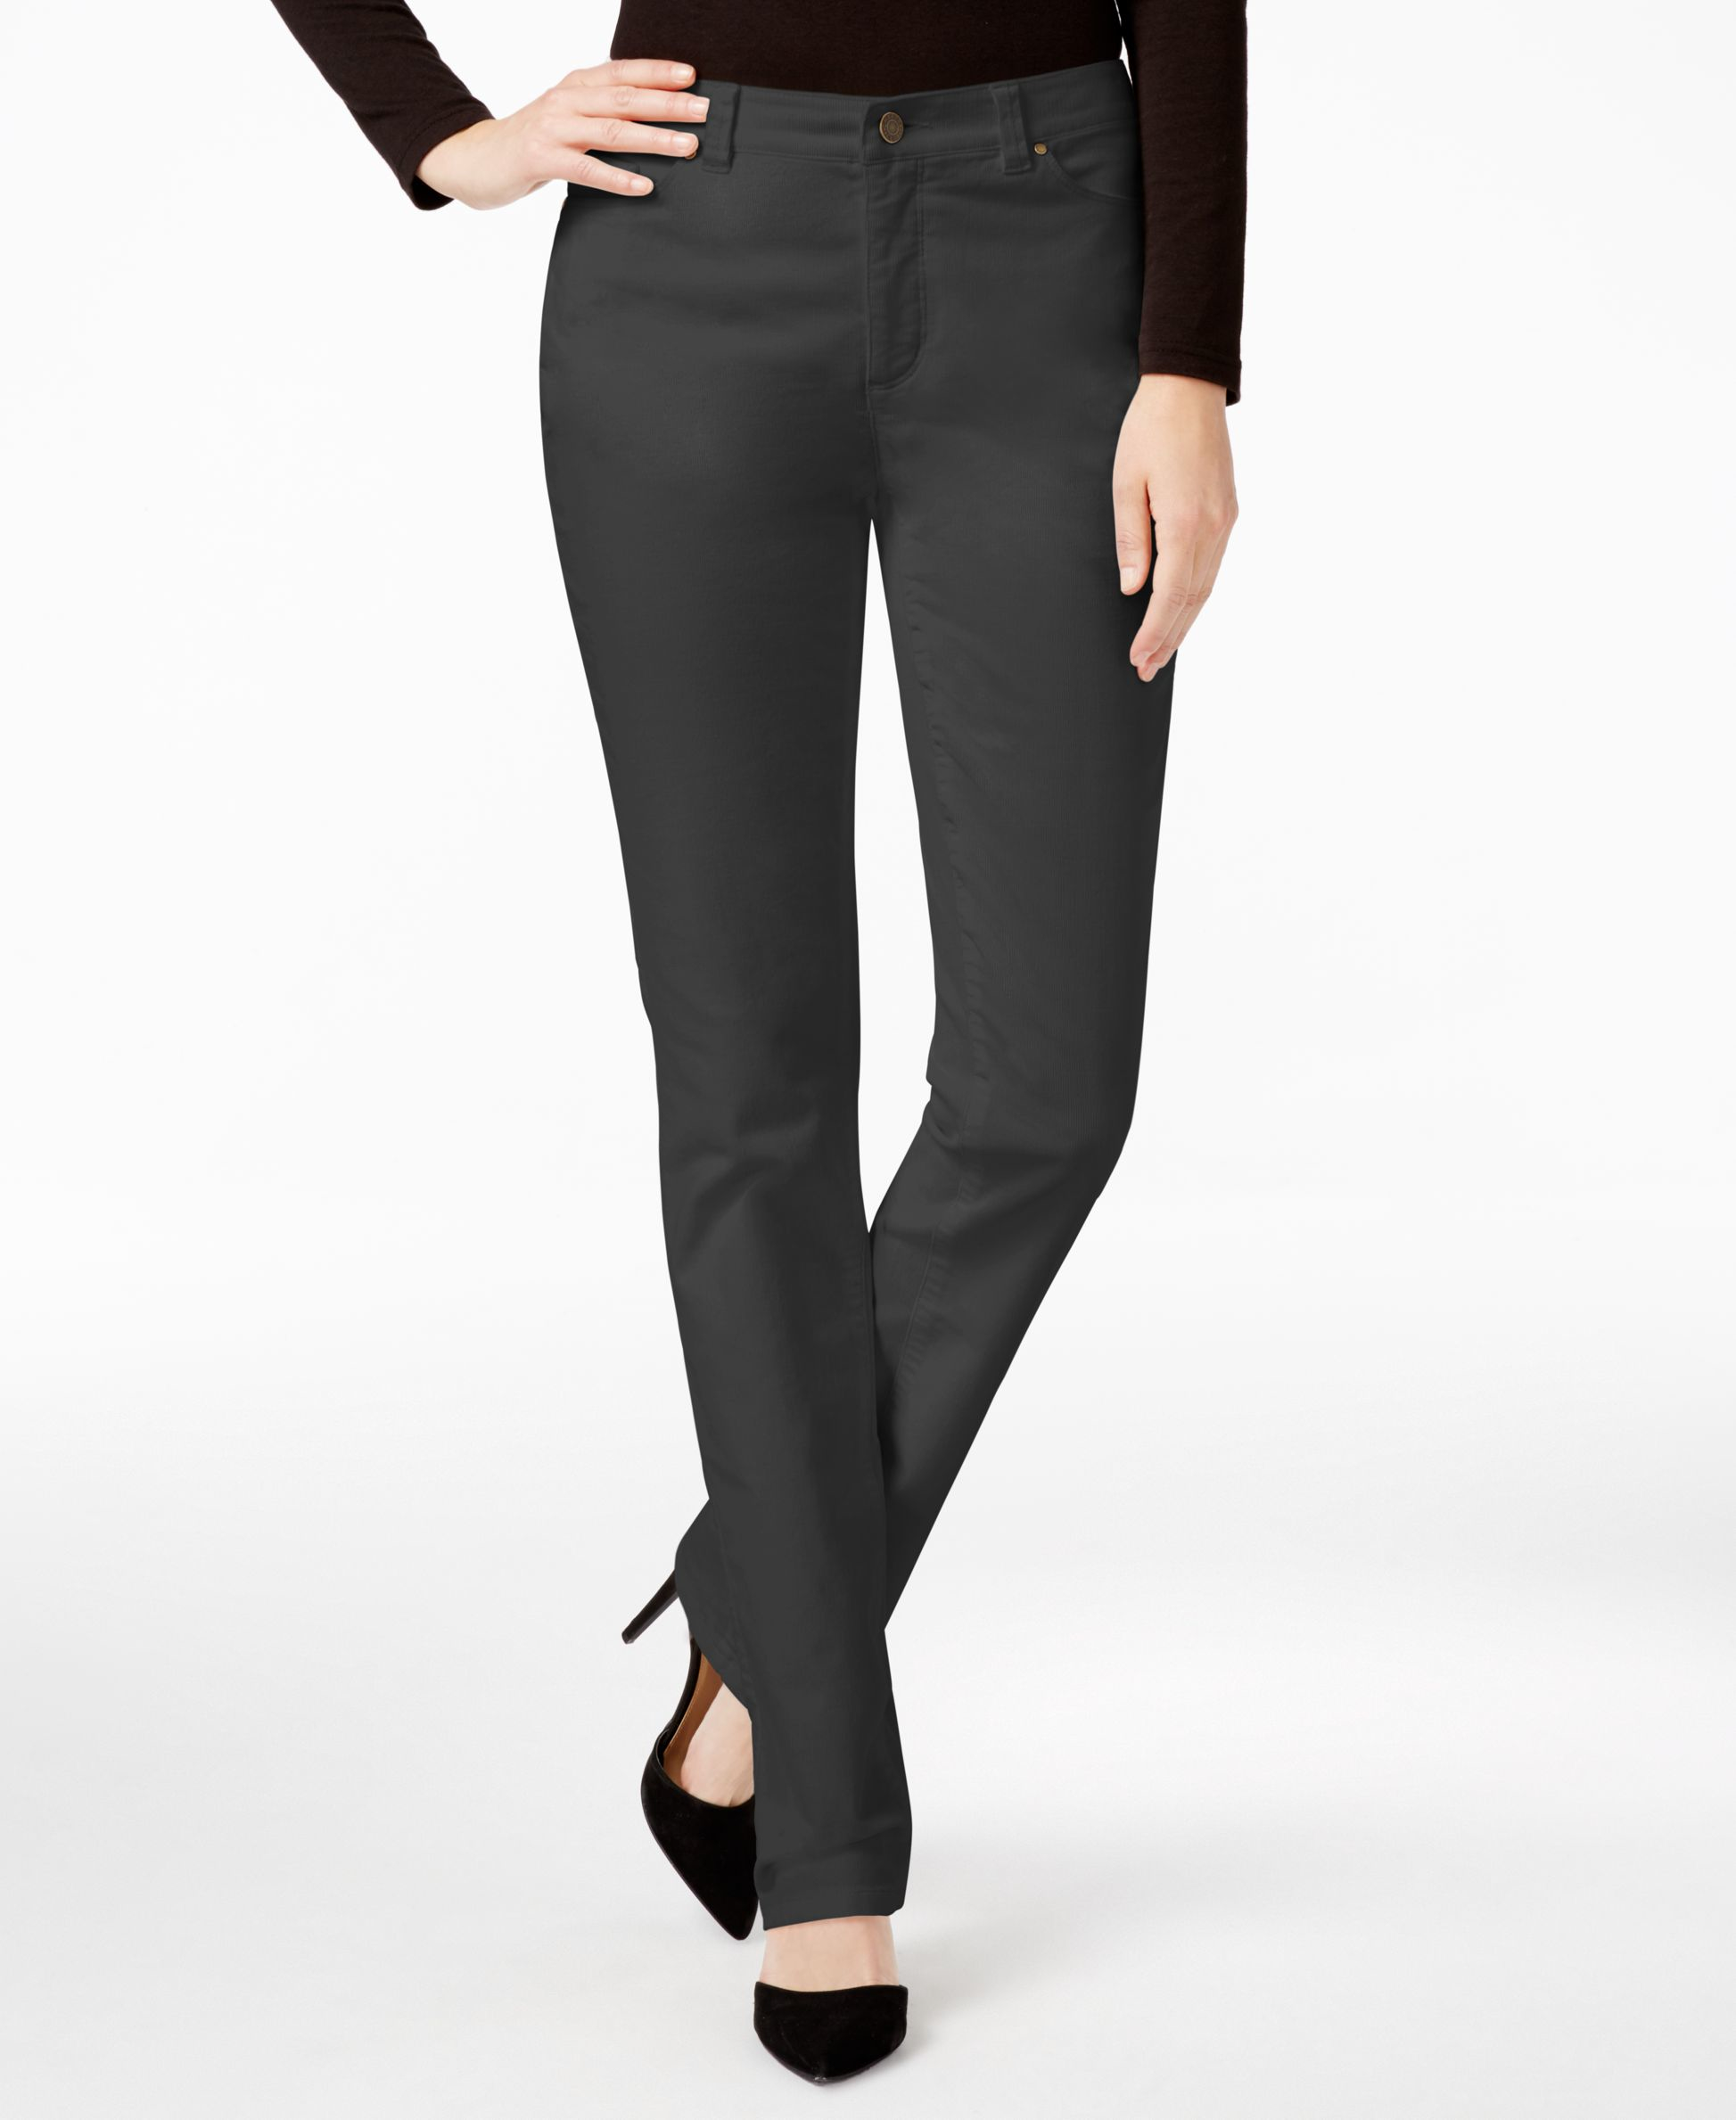 Charter club Petite Lexington Corduroy Pants, Only At Macy's in Gray ...